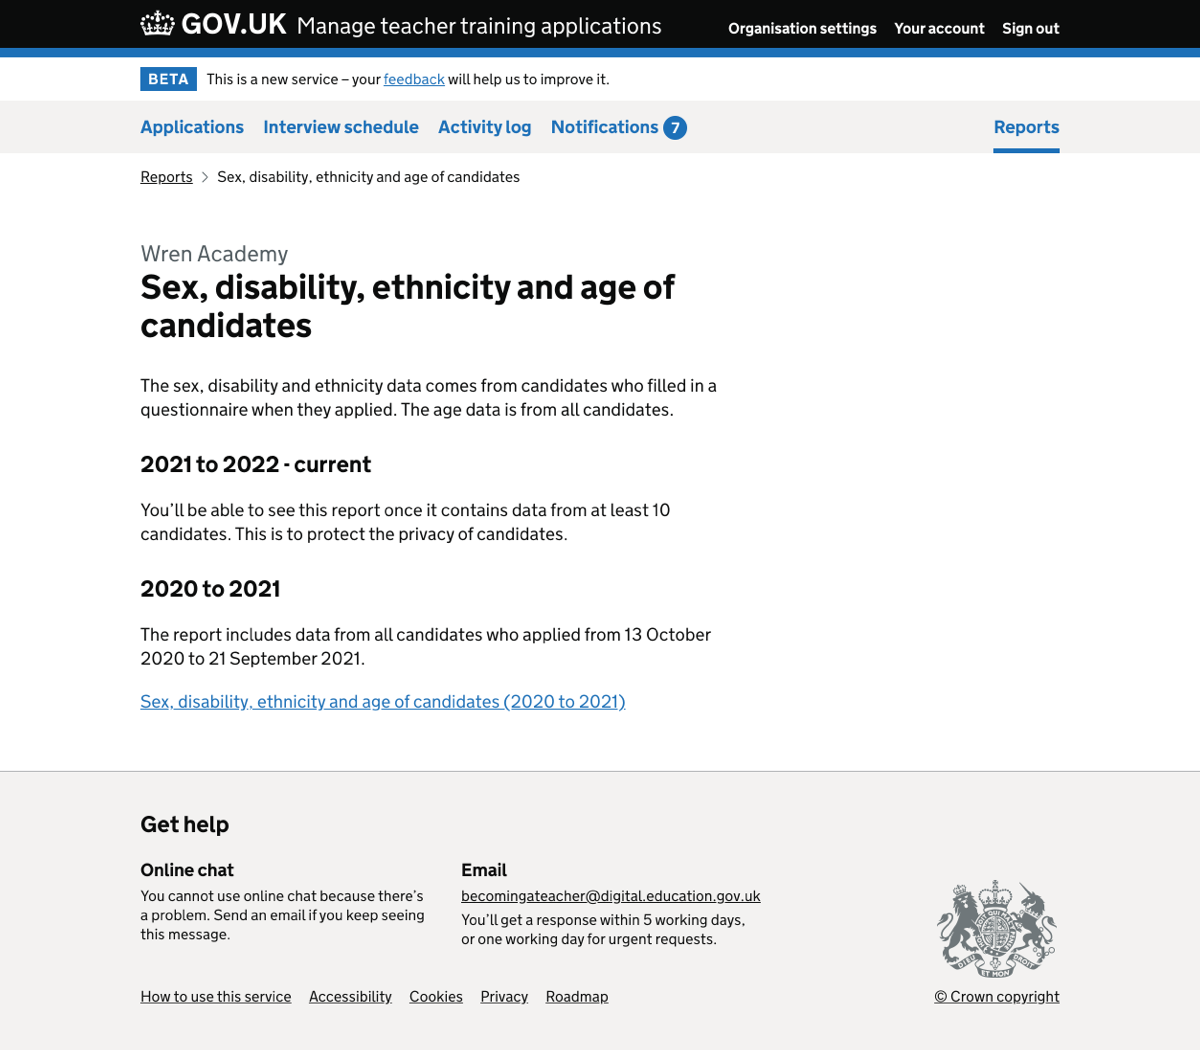 Candidate sex, disability, ethnicity and age report - interstitial with current report hidden